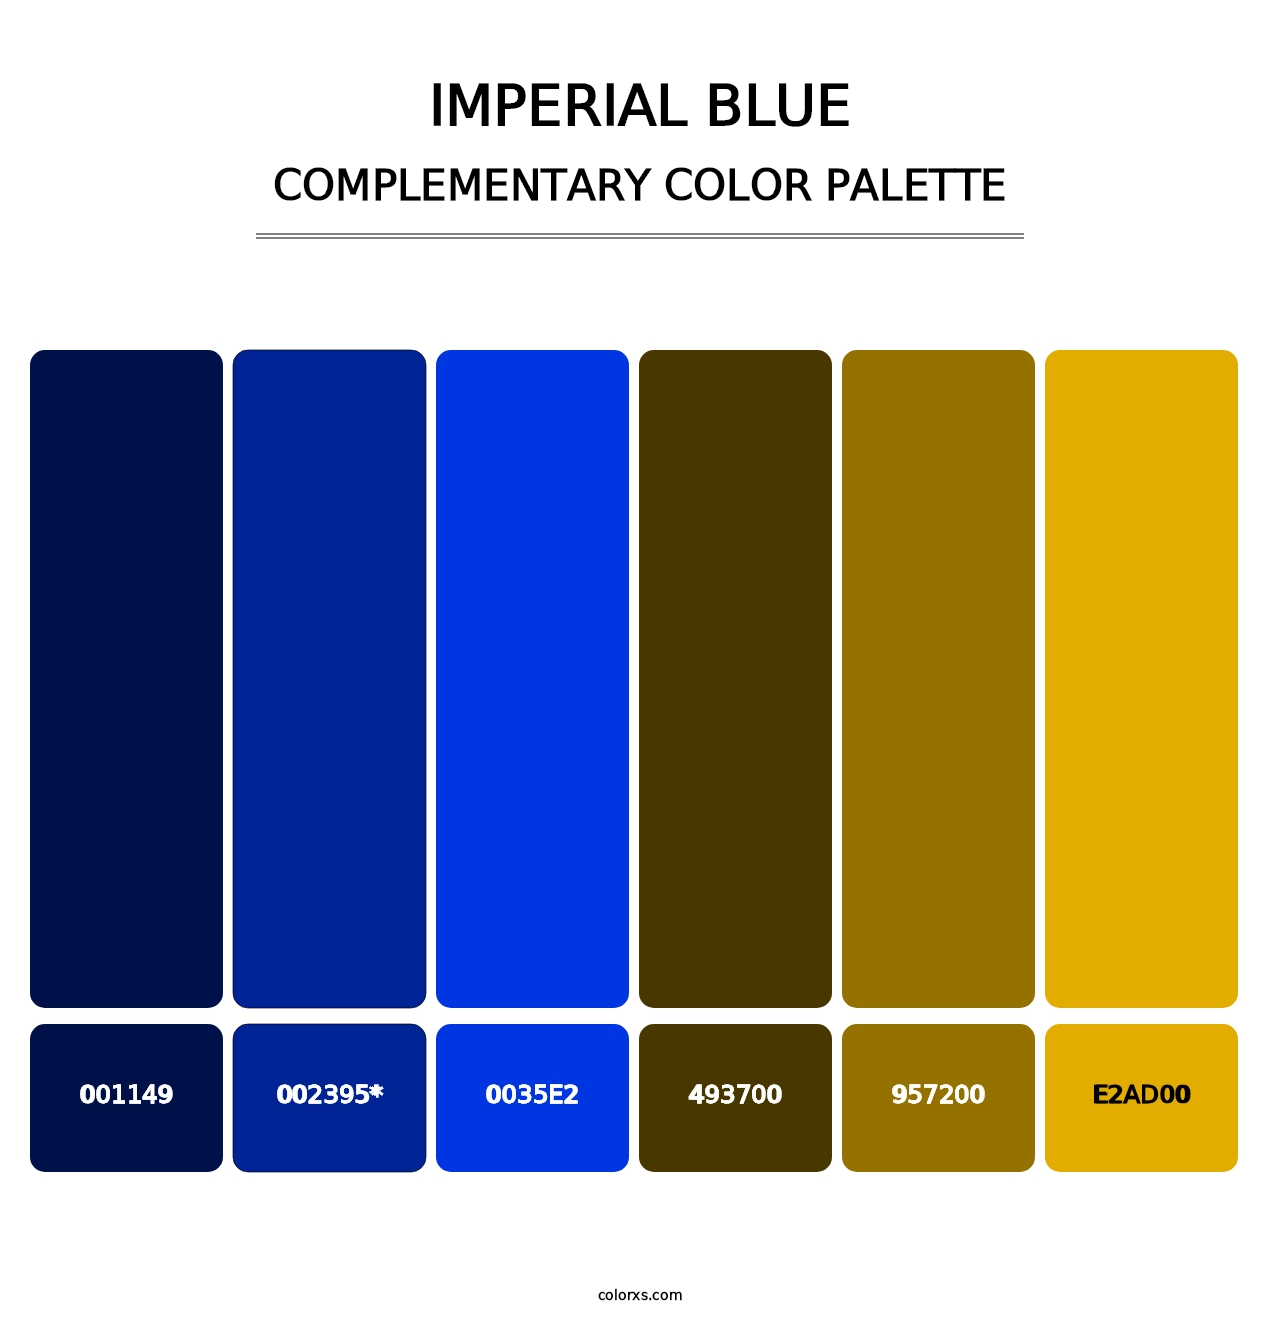 Imperial Blue - Complementary Color Palette